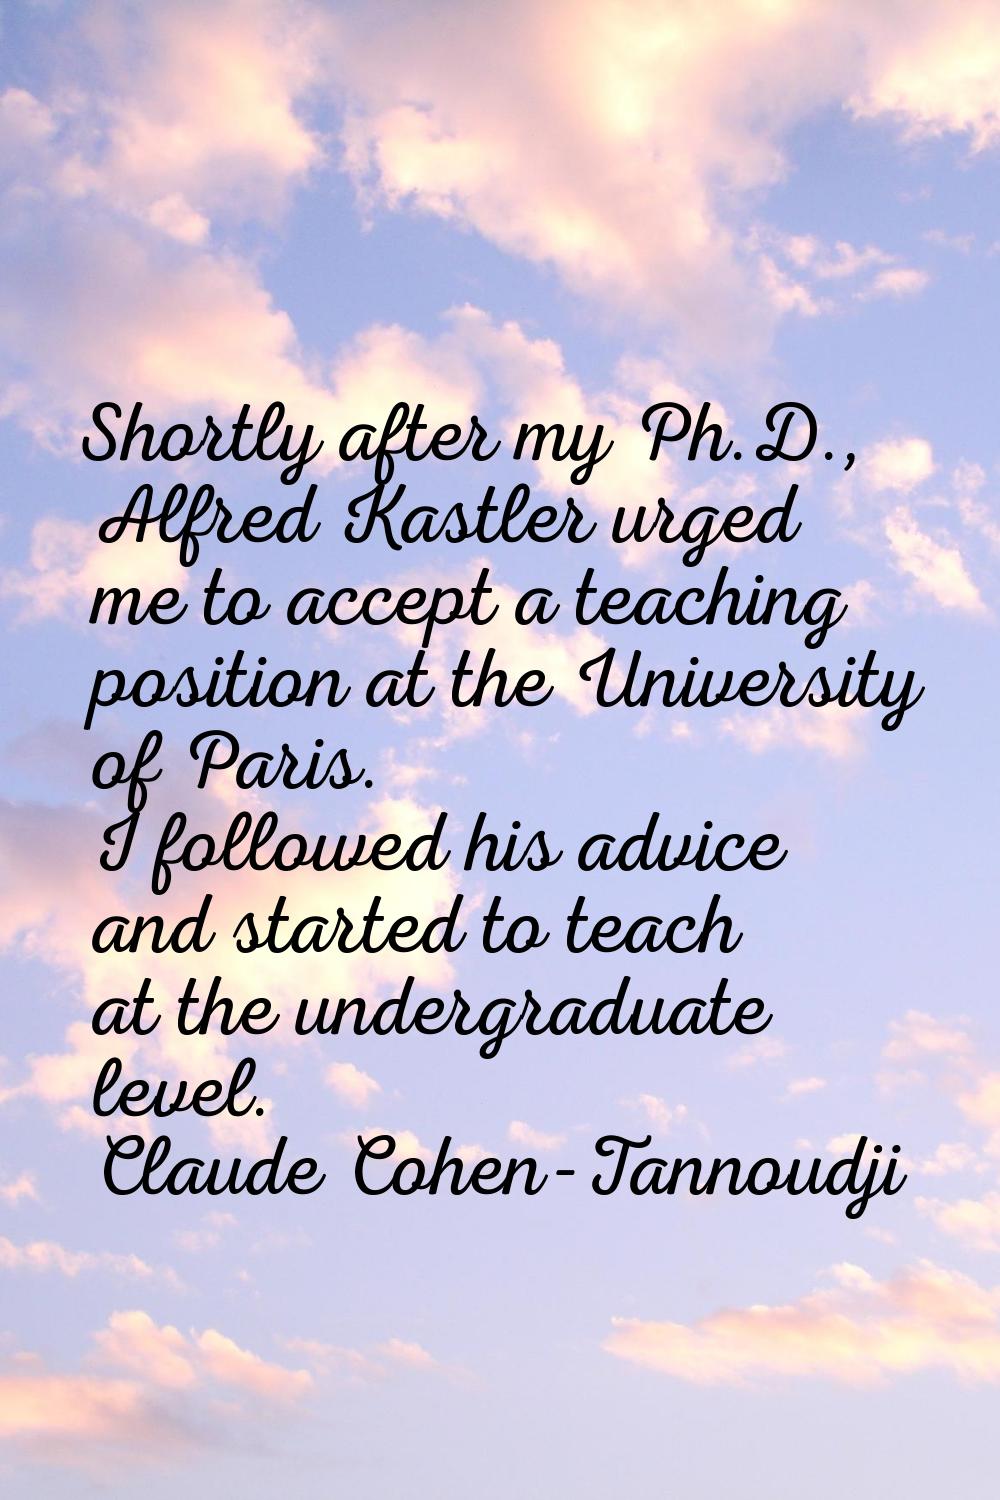 Shortly after my Ph.D., Alfred Kastler urged me to accept a teaching position at the University of 